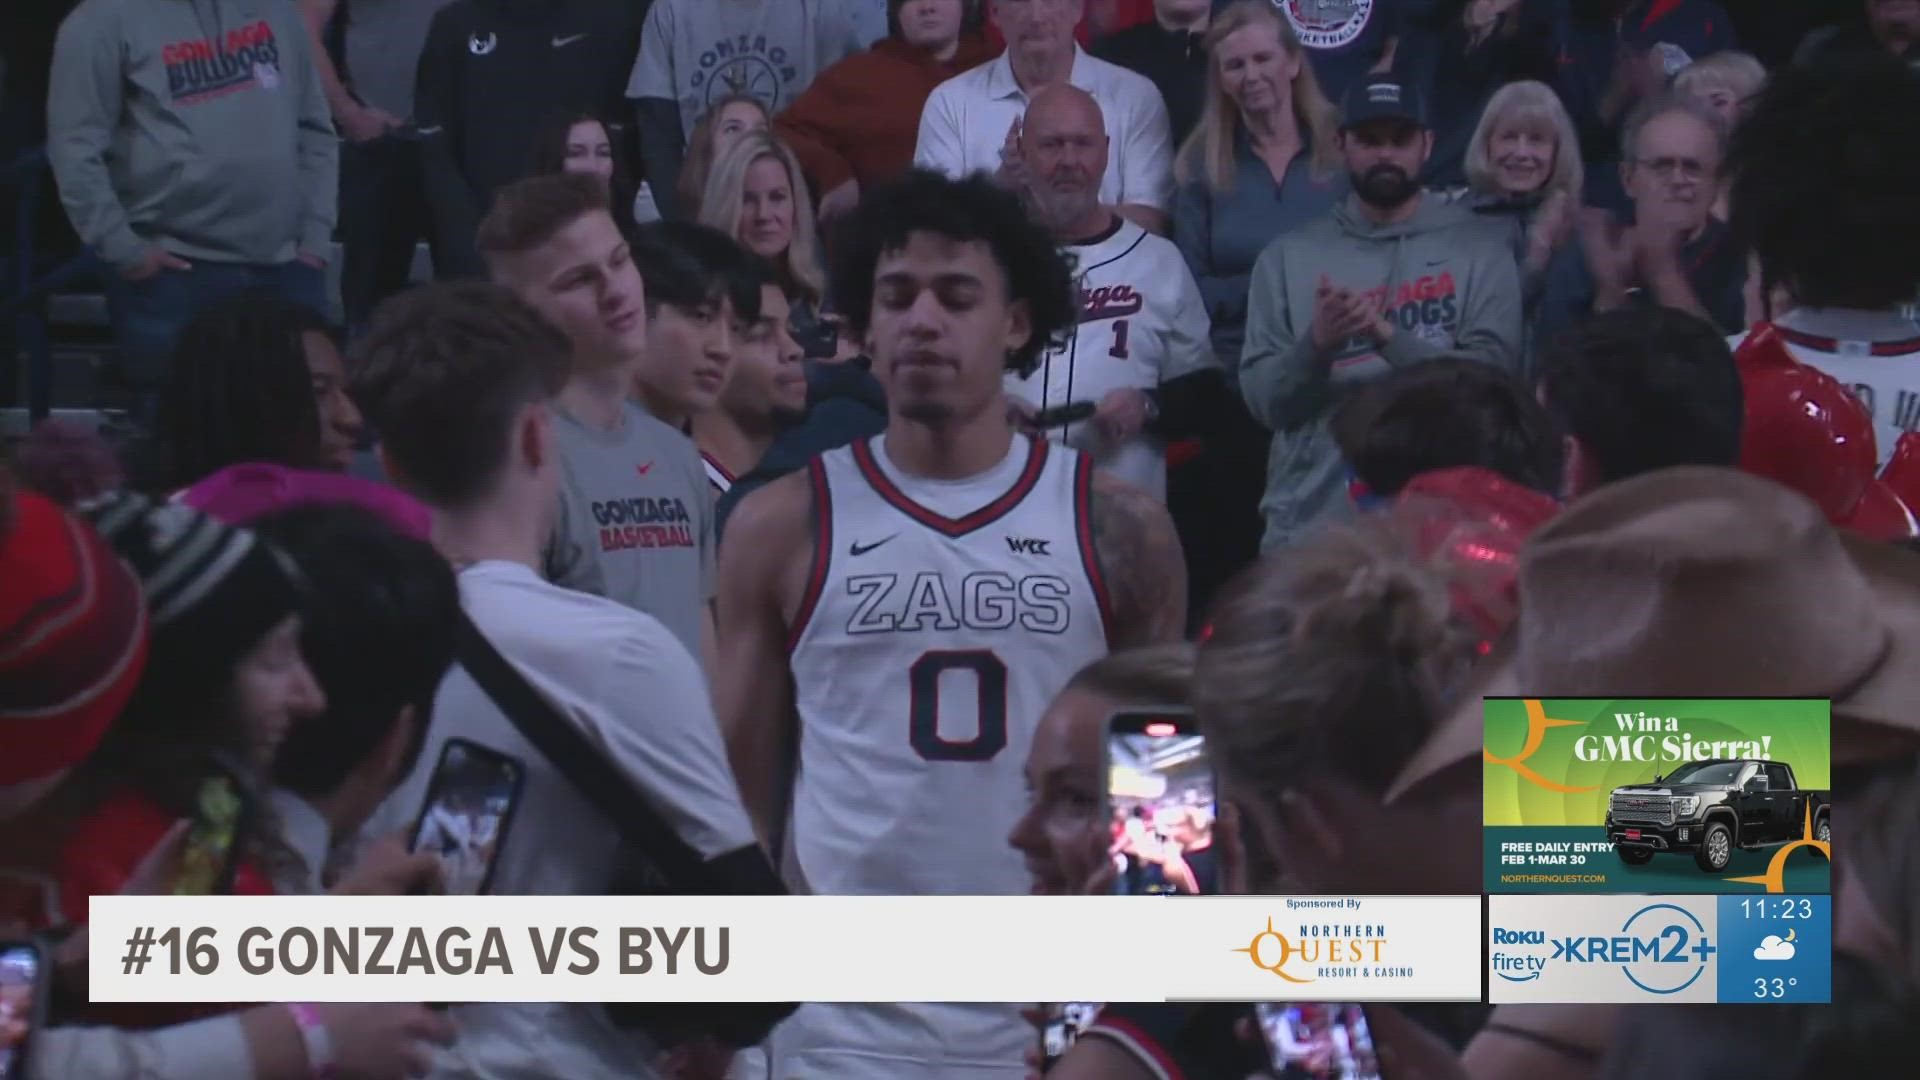 Julian Strawther scored 26 points, including the go-ahead 3-pointer with 3:10 remaining, and No. 16 Gonzaga rallied to beat BYU 88-81.